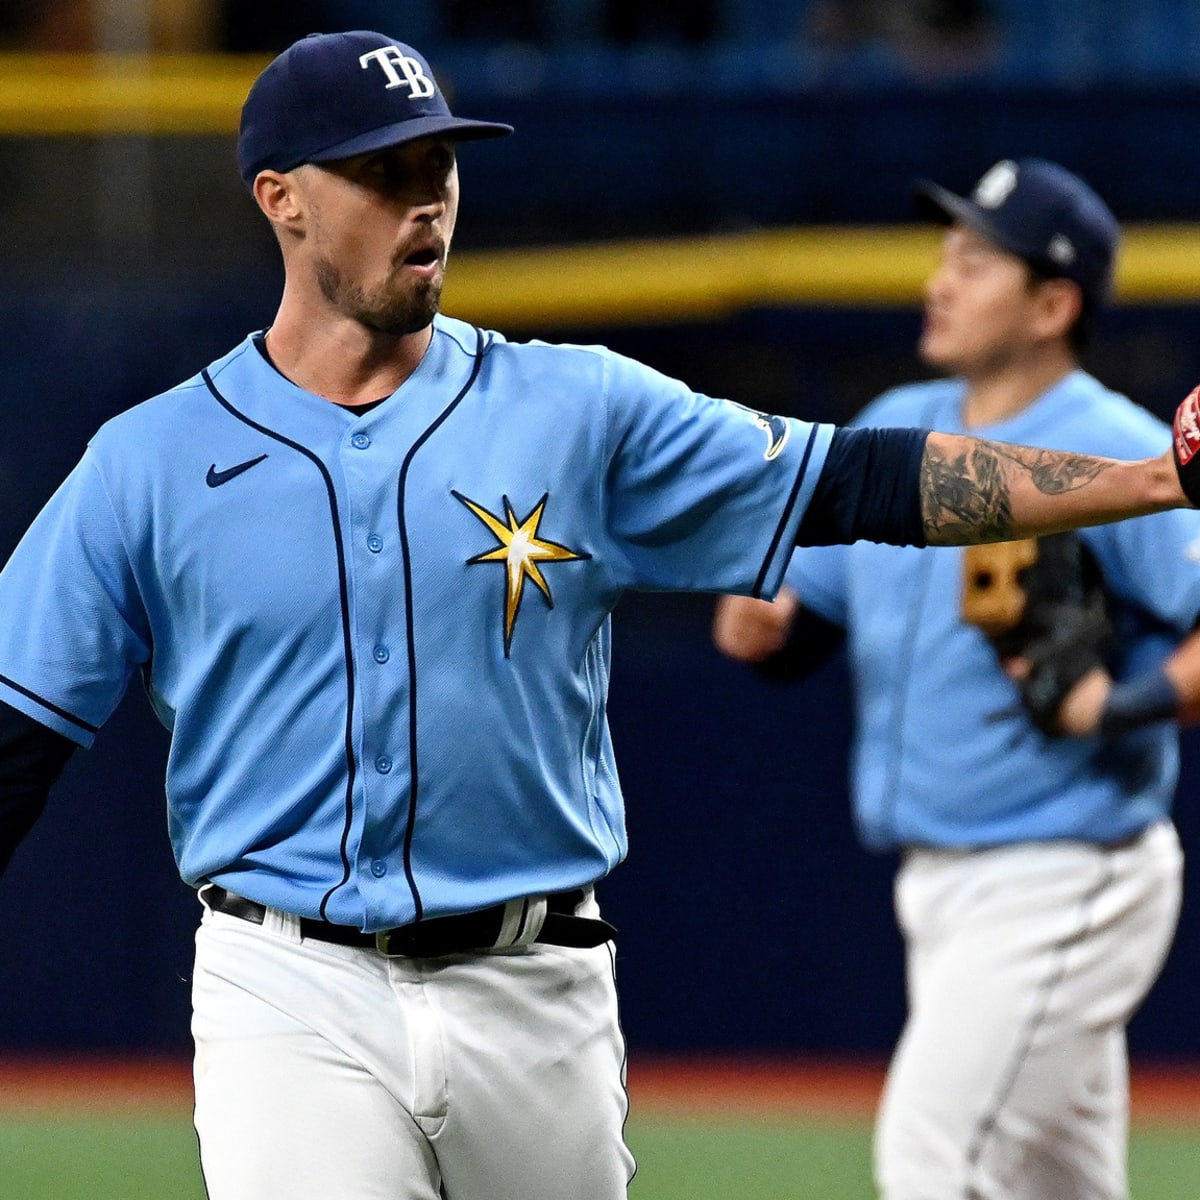 Rays' Randy Arozarena has arrived in Tampa Bay, so let the party begin